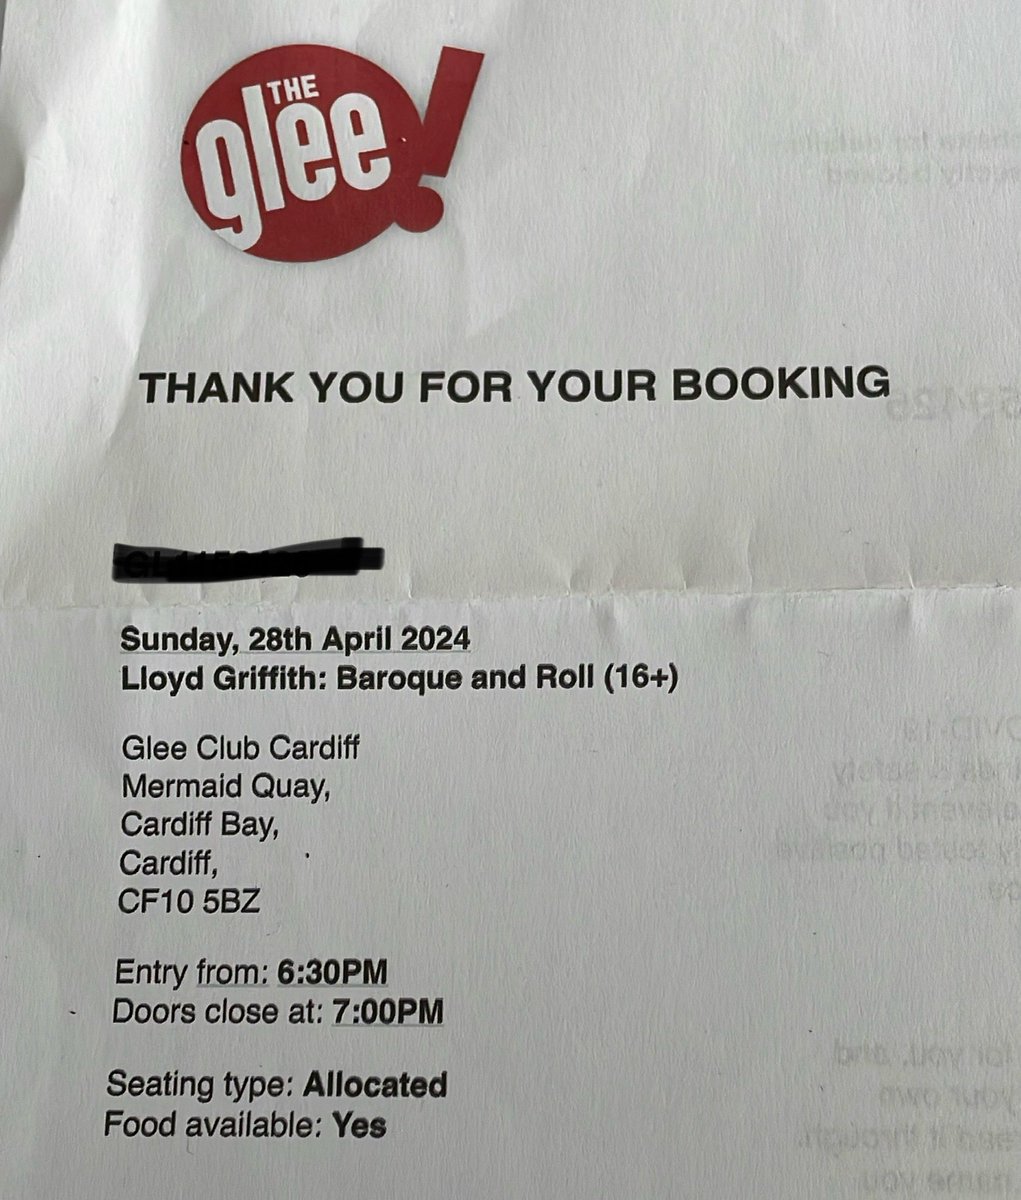 @GleeClubCardiff I have tickets to see @LloydGriffith tonight. Can’t seem to see any marketing for this event? Can you please advise. Many thanks